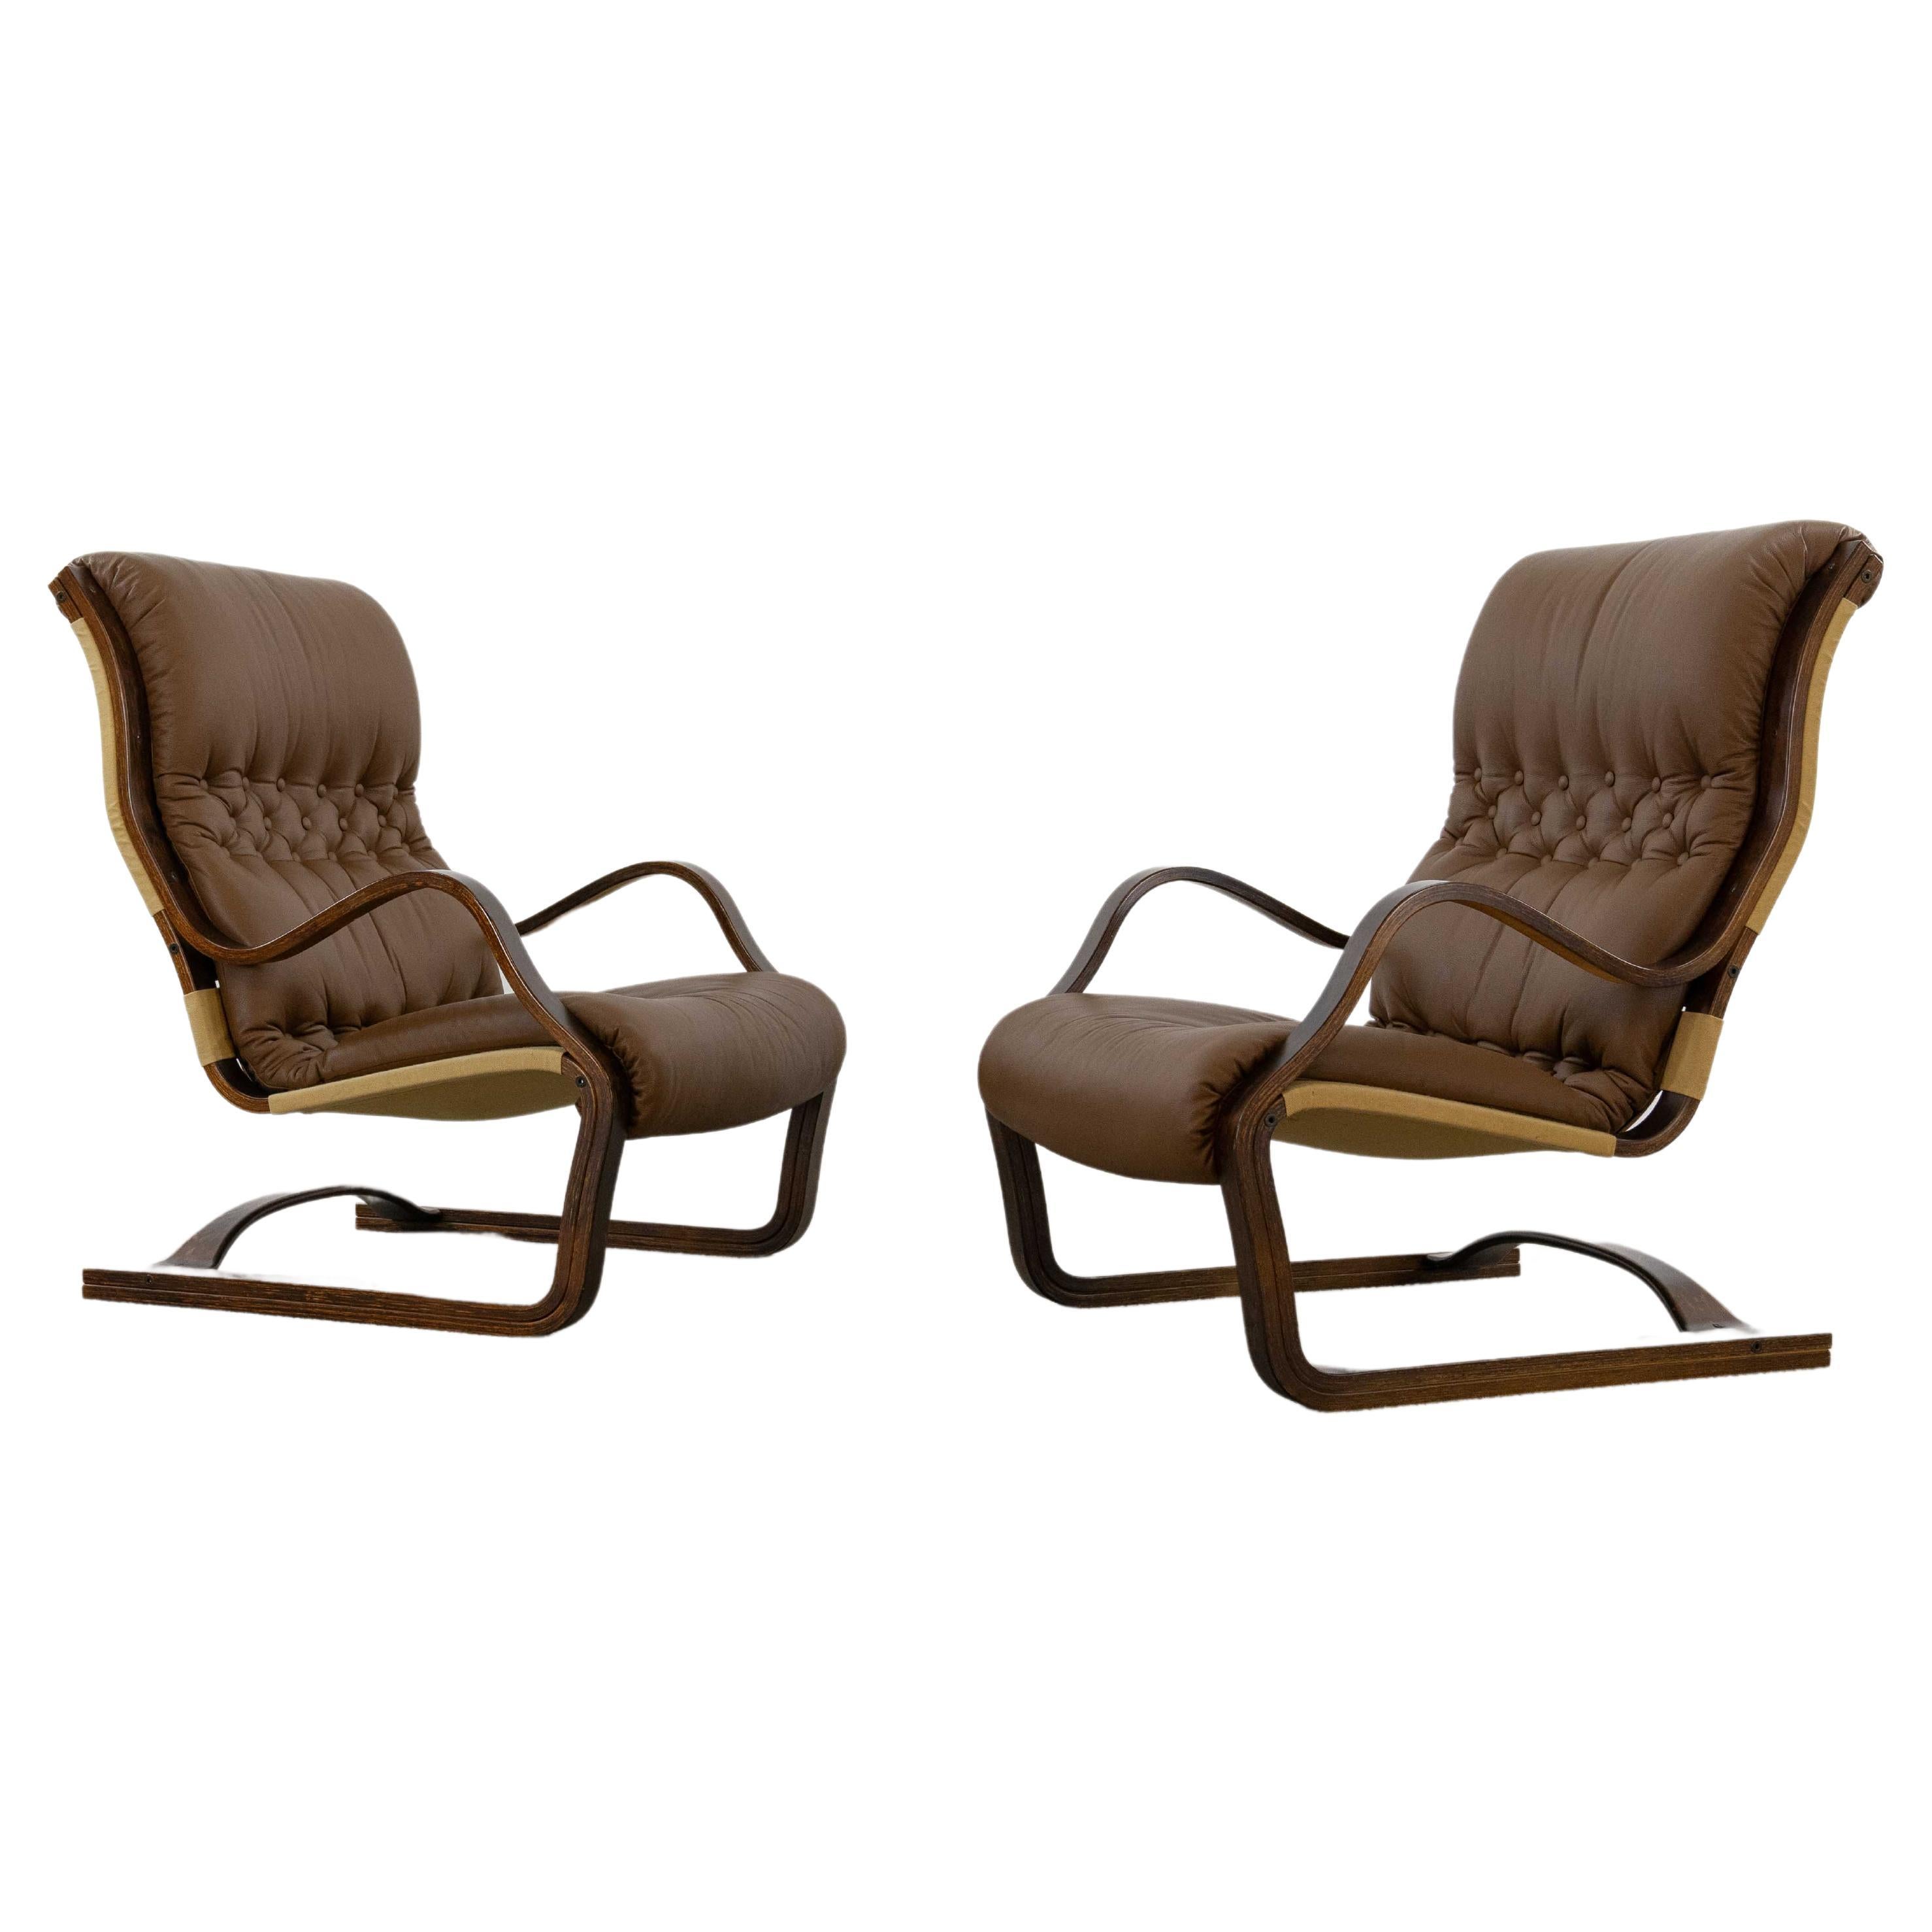 Set of 2 KOIVUTARU Easy Chairs by Esko Pajamies for ASKO in brown leather For Sale